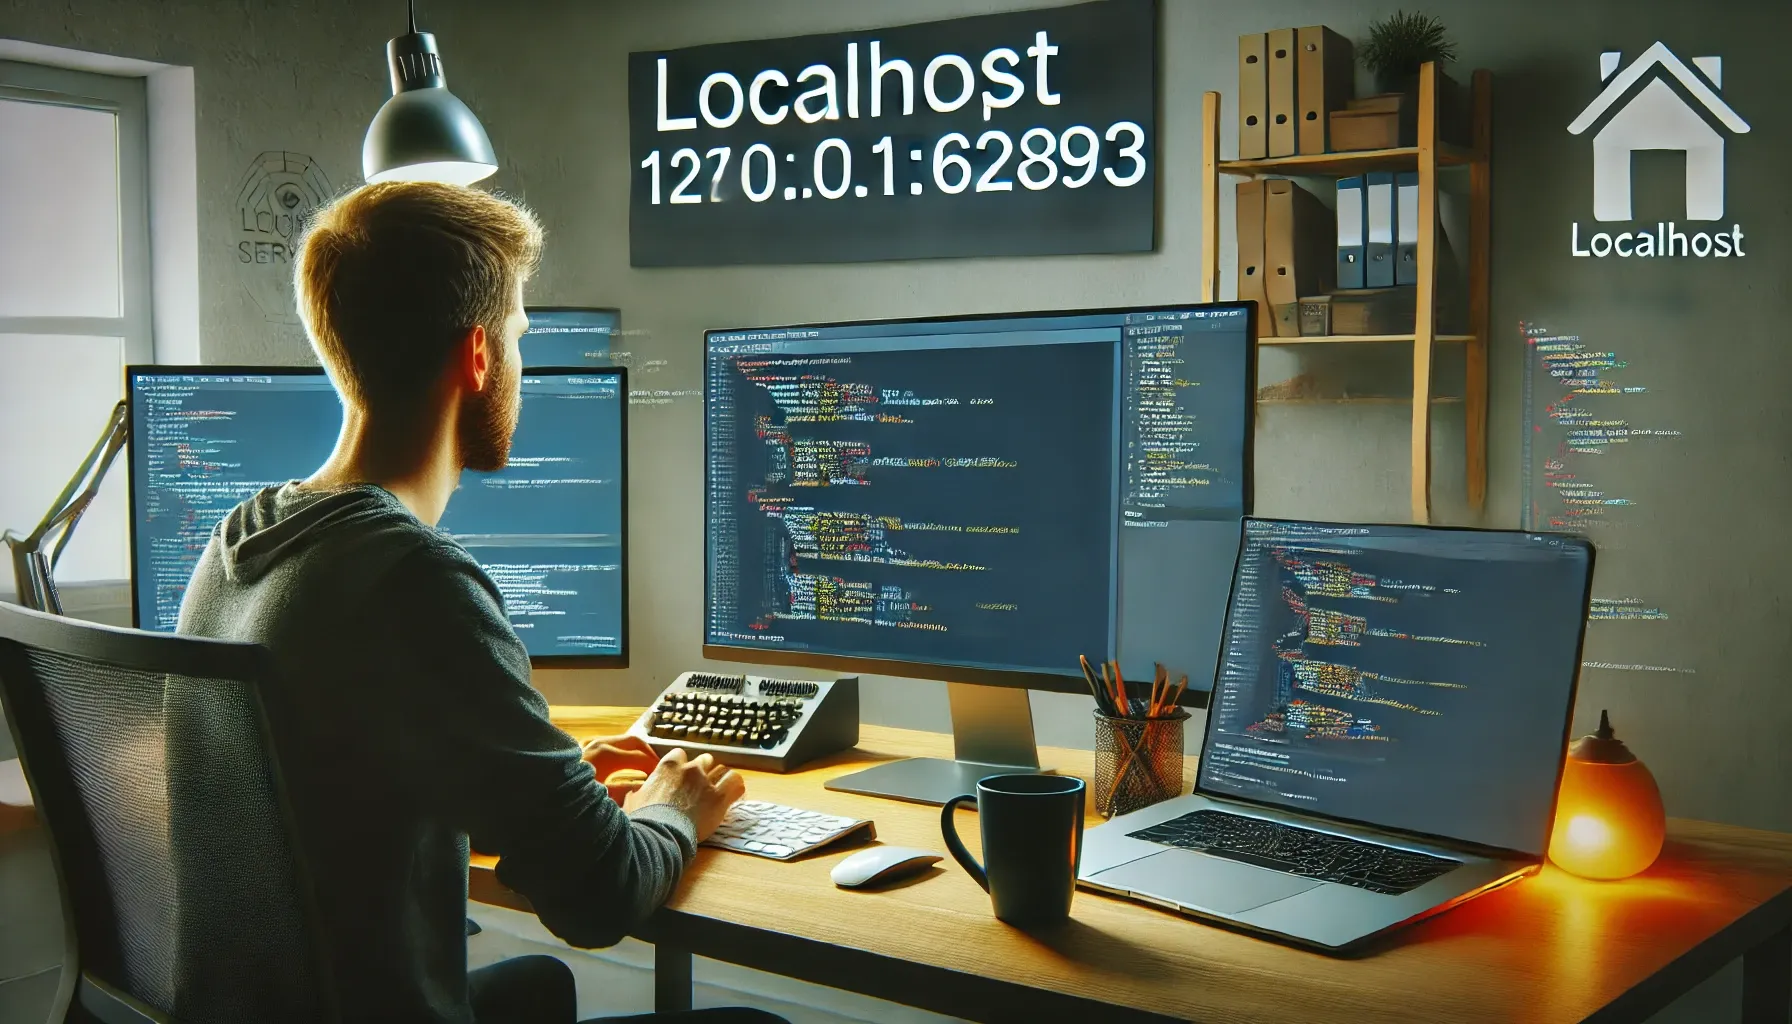 Understanding 127.0.0.1:62893 – The Localhost Mystery